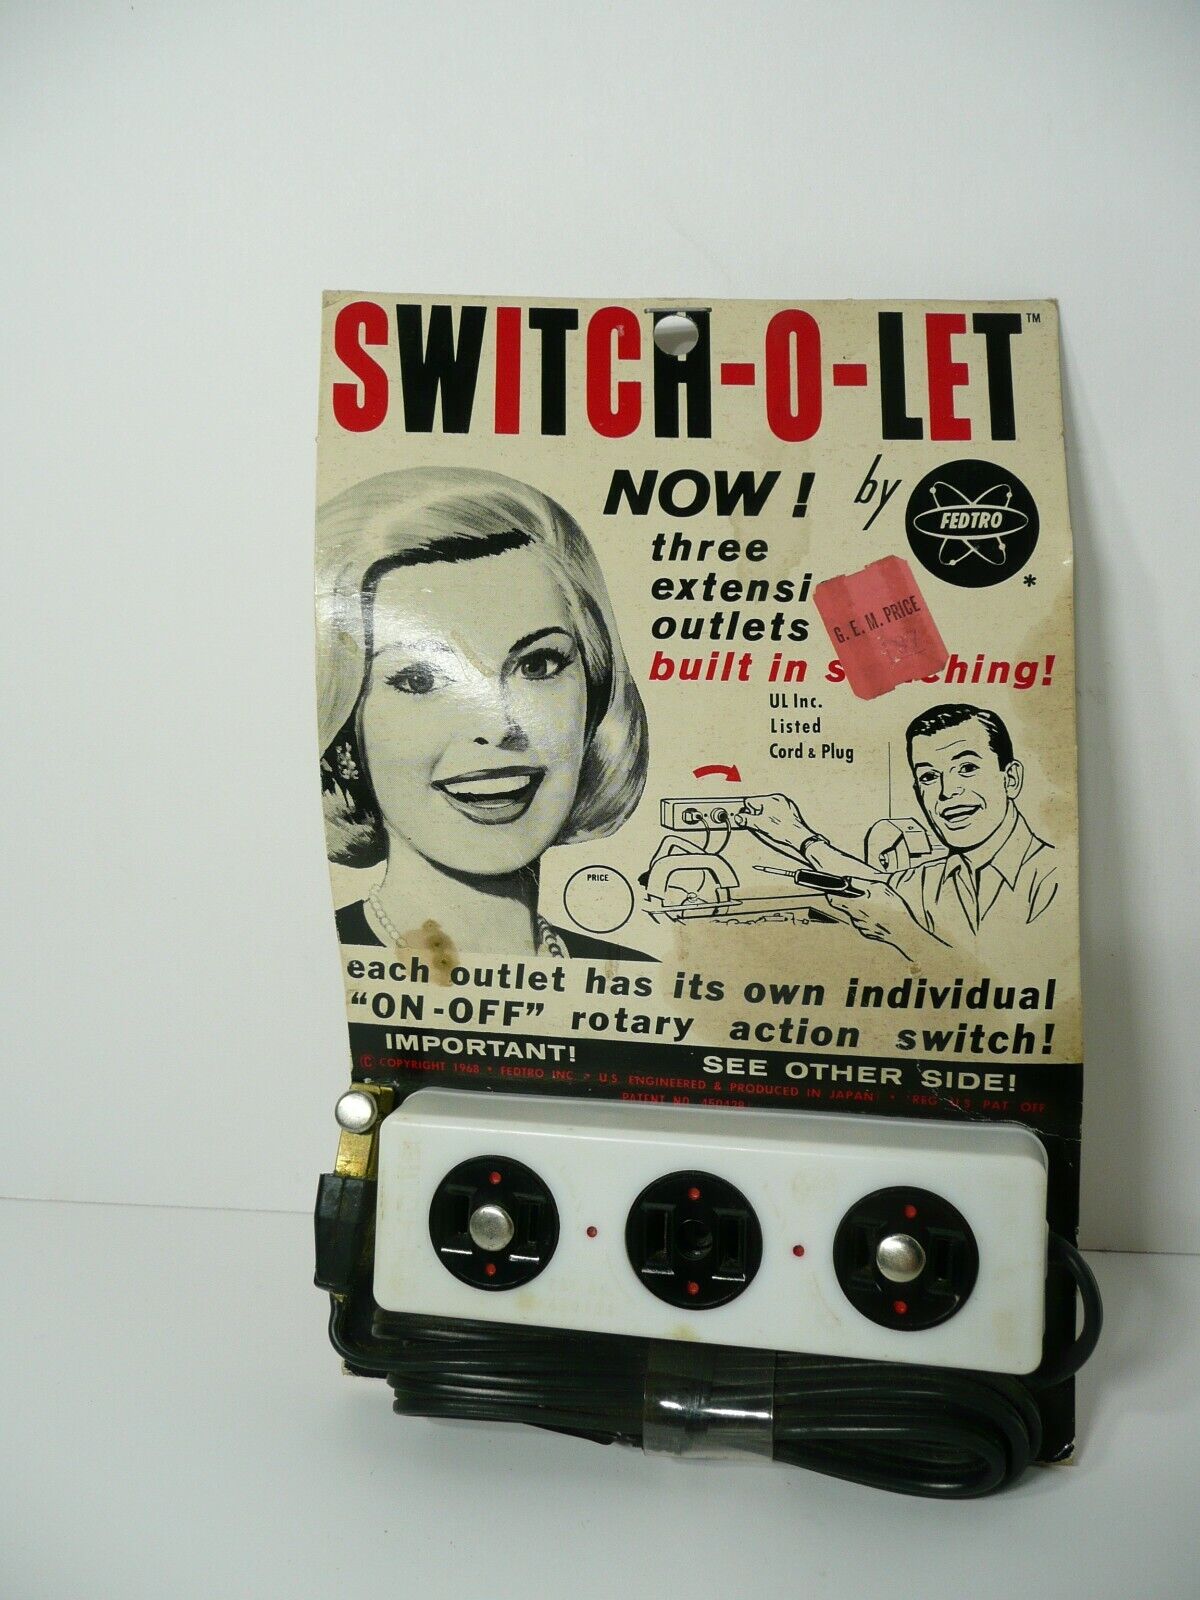 Vintage 1968 Pat. Fedtro Switch-O-Let SWT-3 New In Original Package FEDTRO n/a